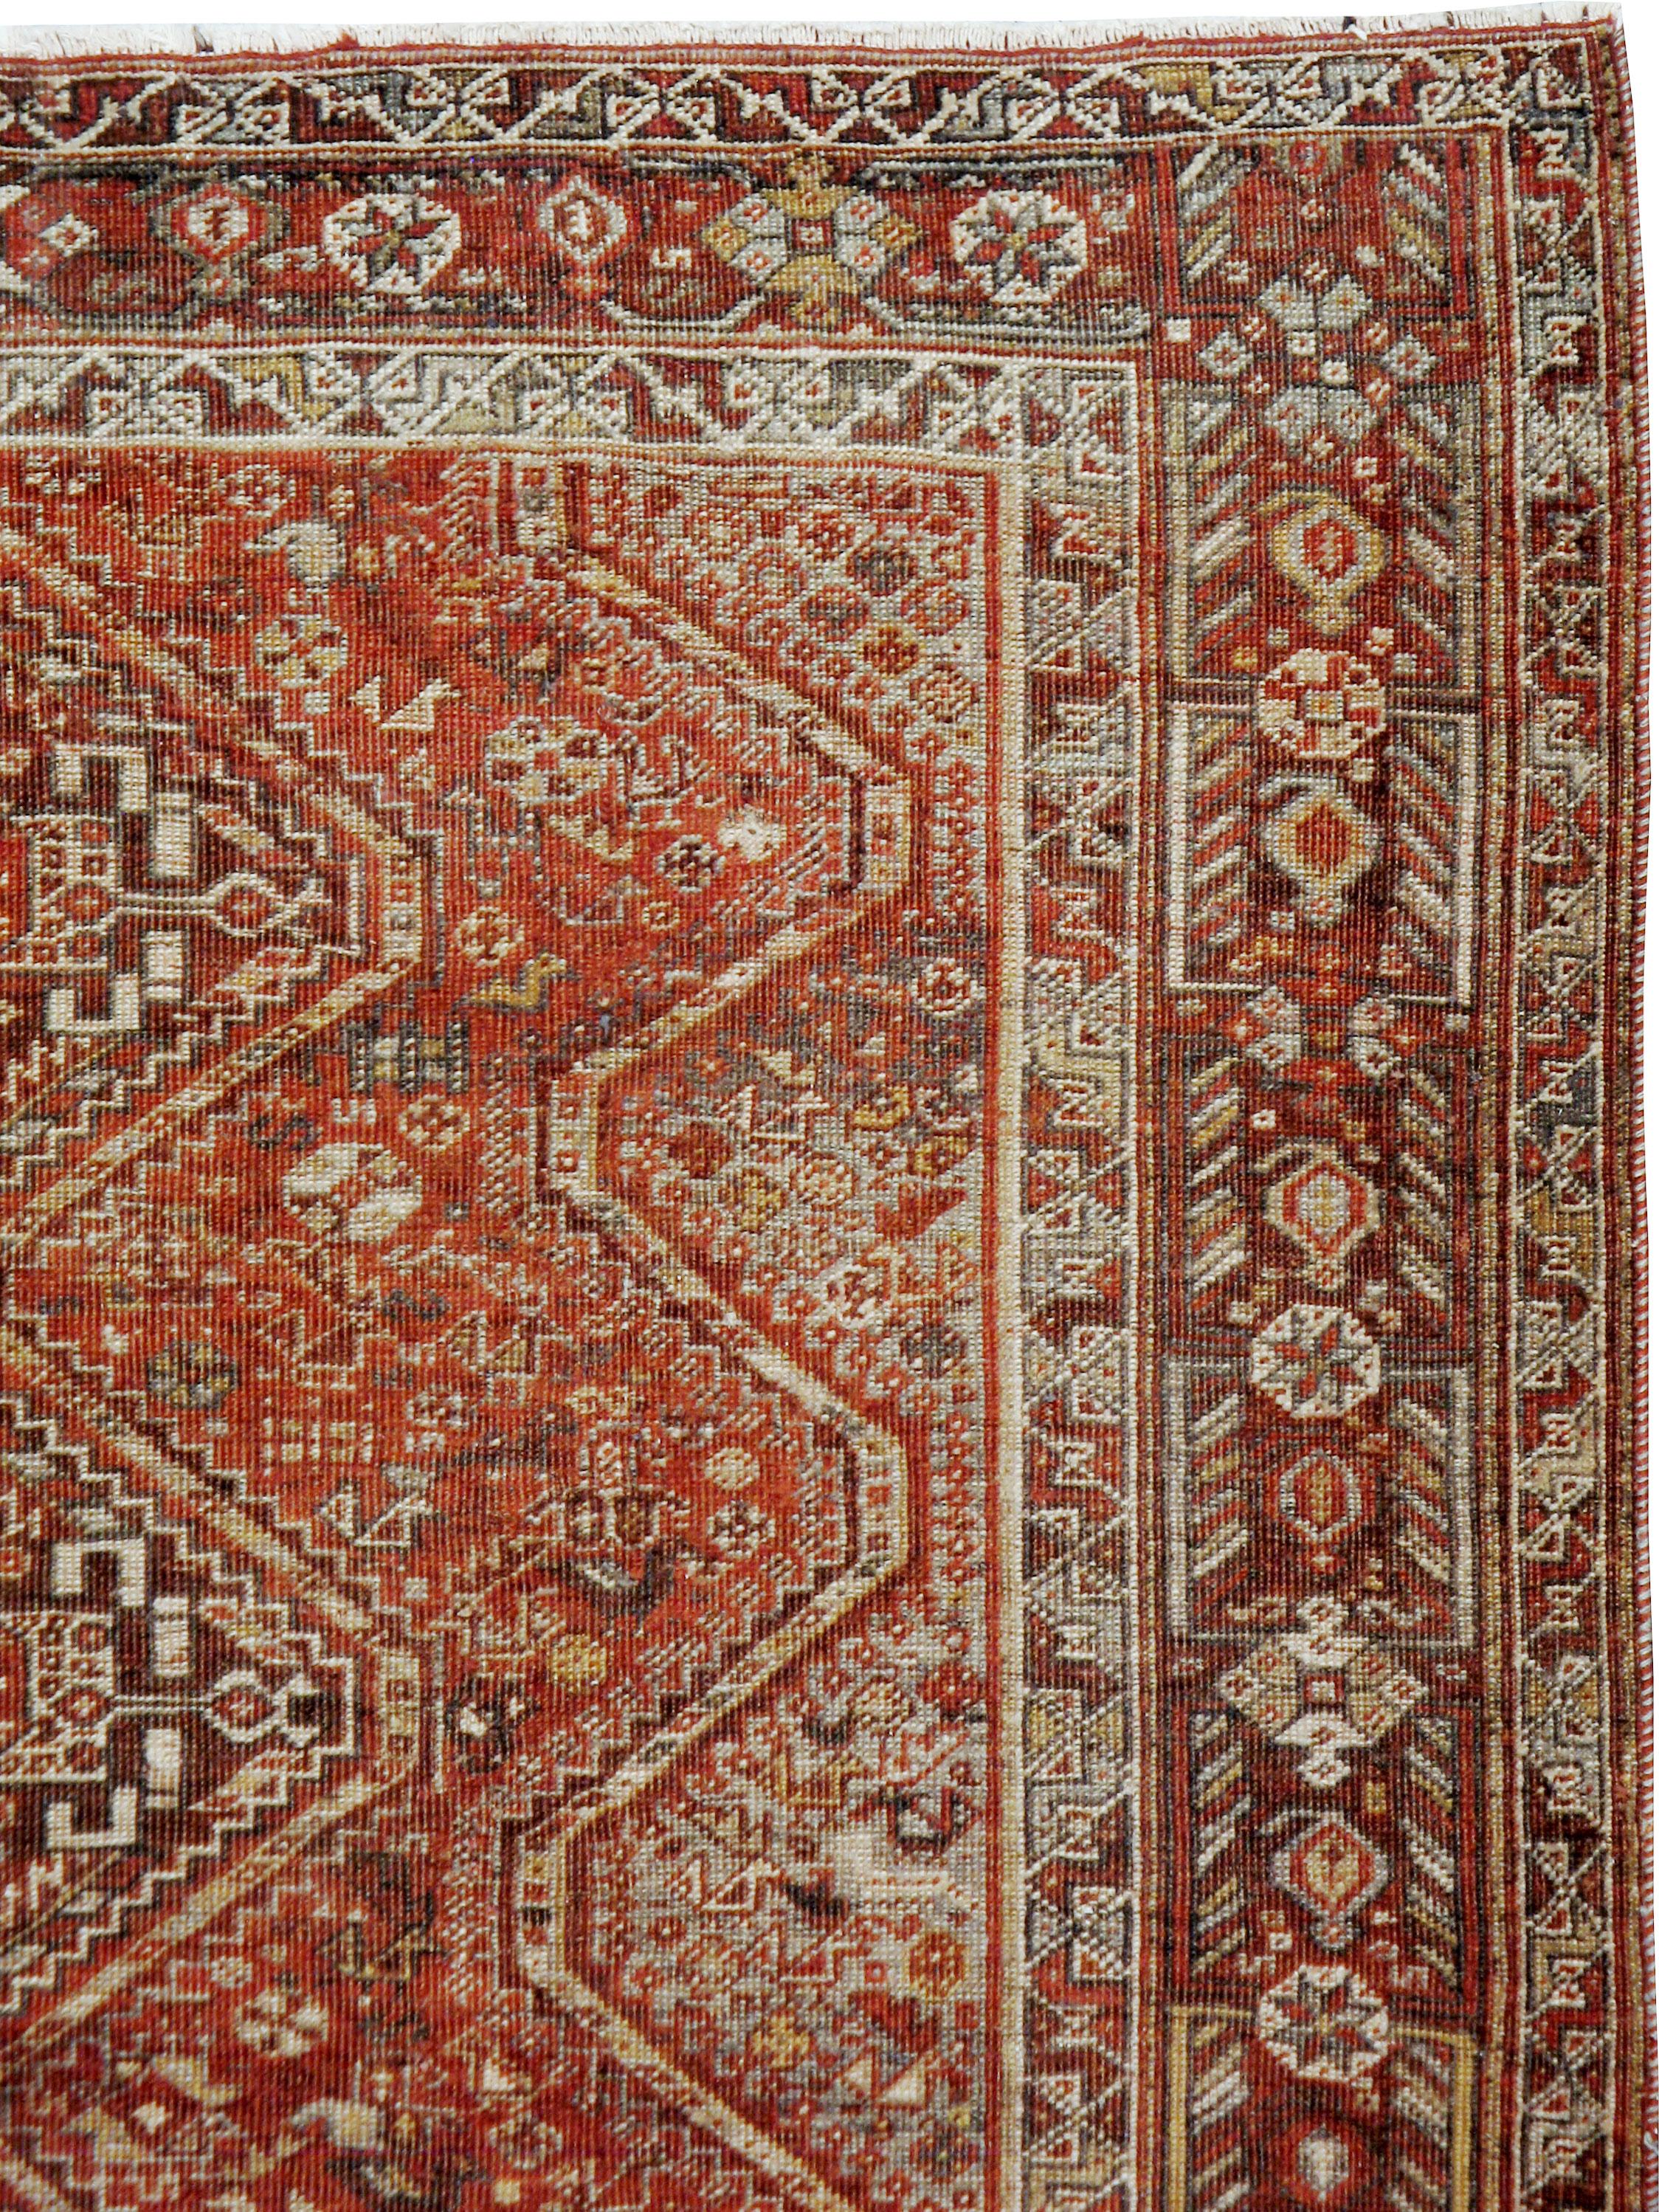 An antique Persian Shiraz rug from the early 20th century.

Measures: 5' 5